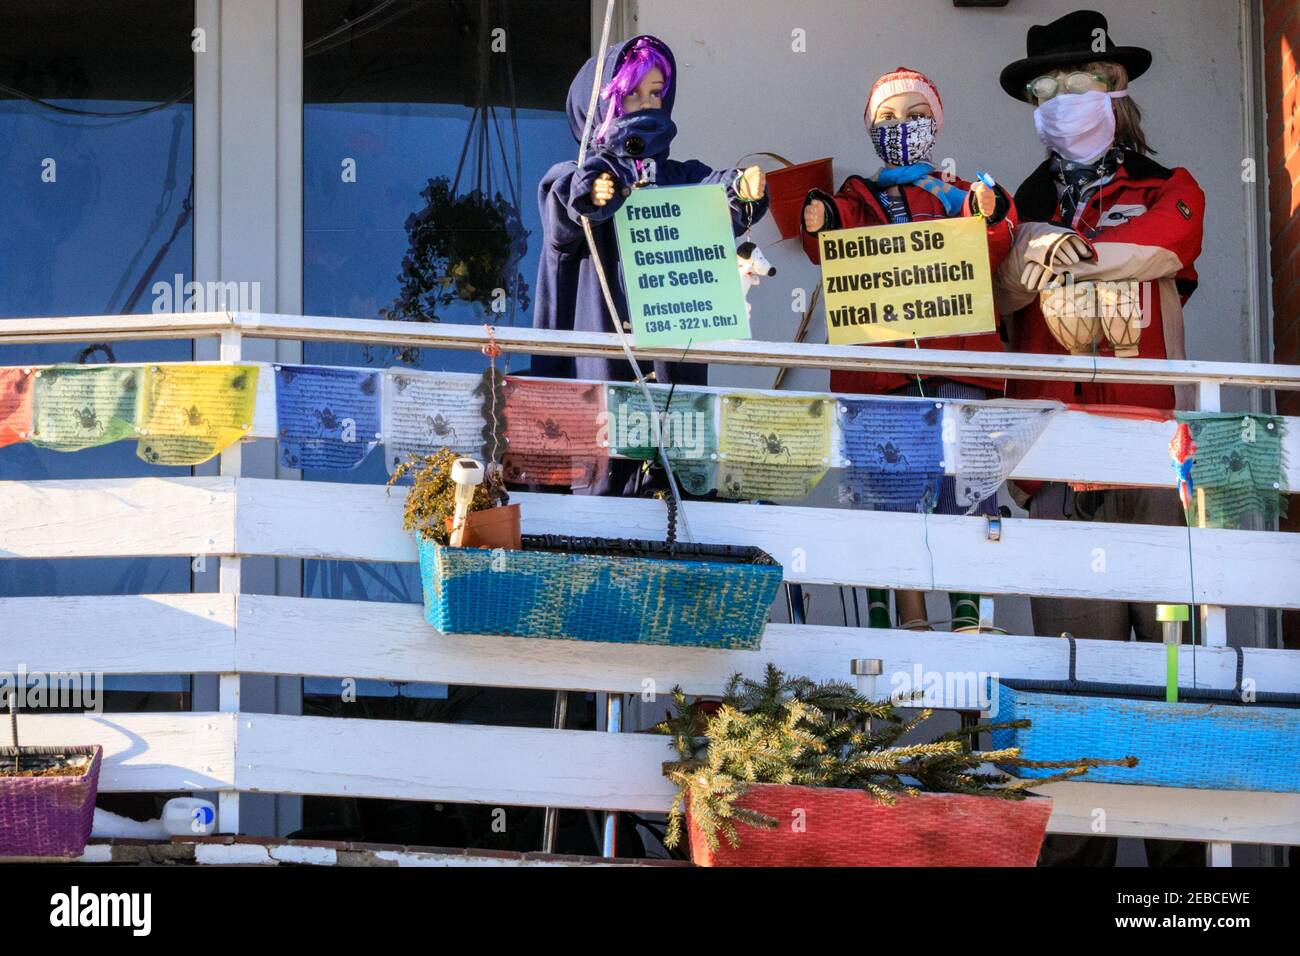 Sythen, Münsterland, NRW, 12th Feb 2021. A family have put up a scene with dressed shop dummies wearing face masks and positive messages of encouragement to 'stay optimistic' on their balcony in the small village of Sythen near Haltern-am-See in North Rhine-Westphalia. Credit: Imageplotter/Alamy Live News Stock Photo